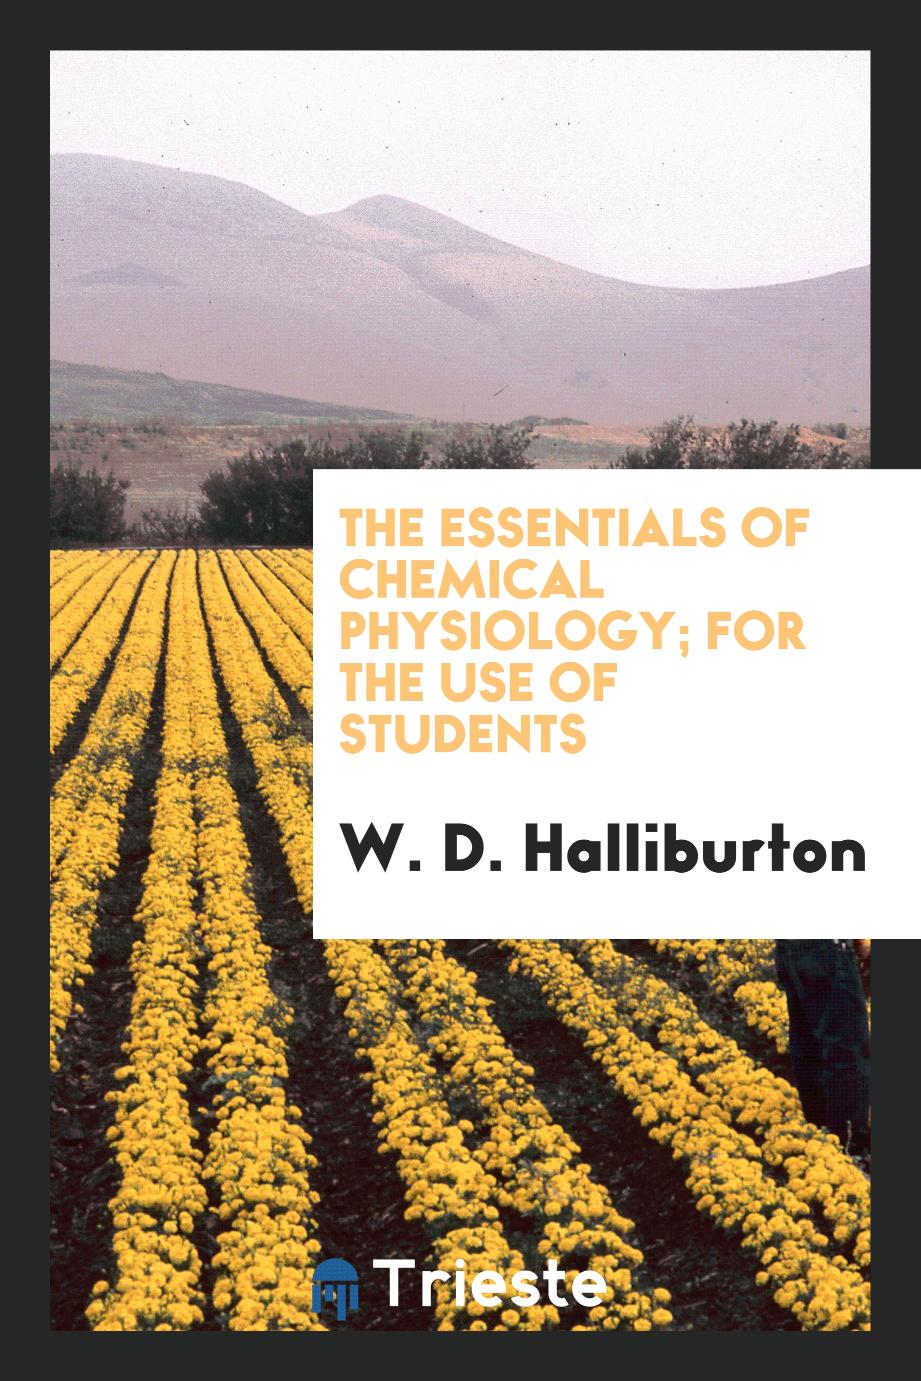 W. D. Halliburton - The Essentials of Chemical Physiology; For the Use of Students